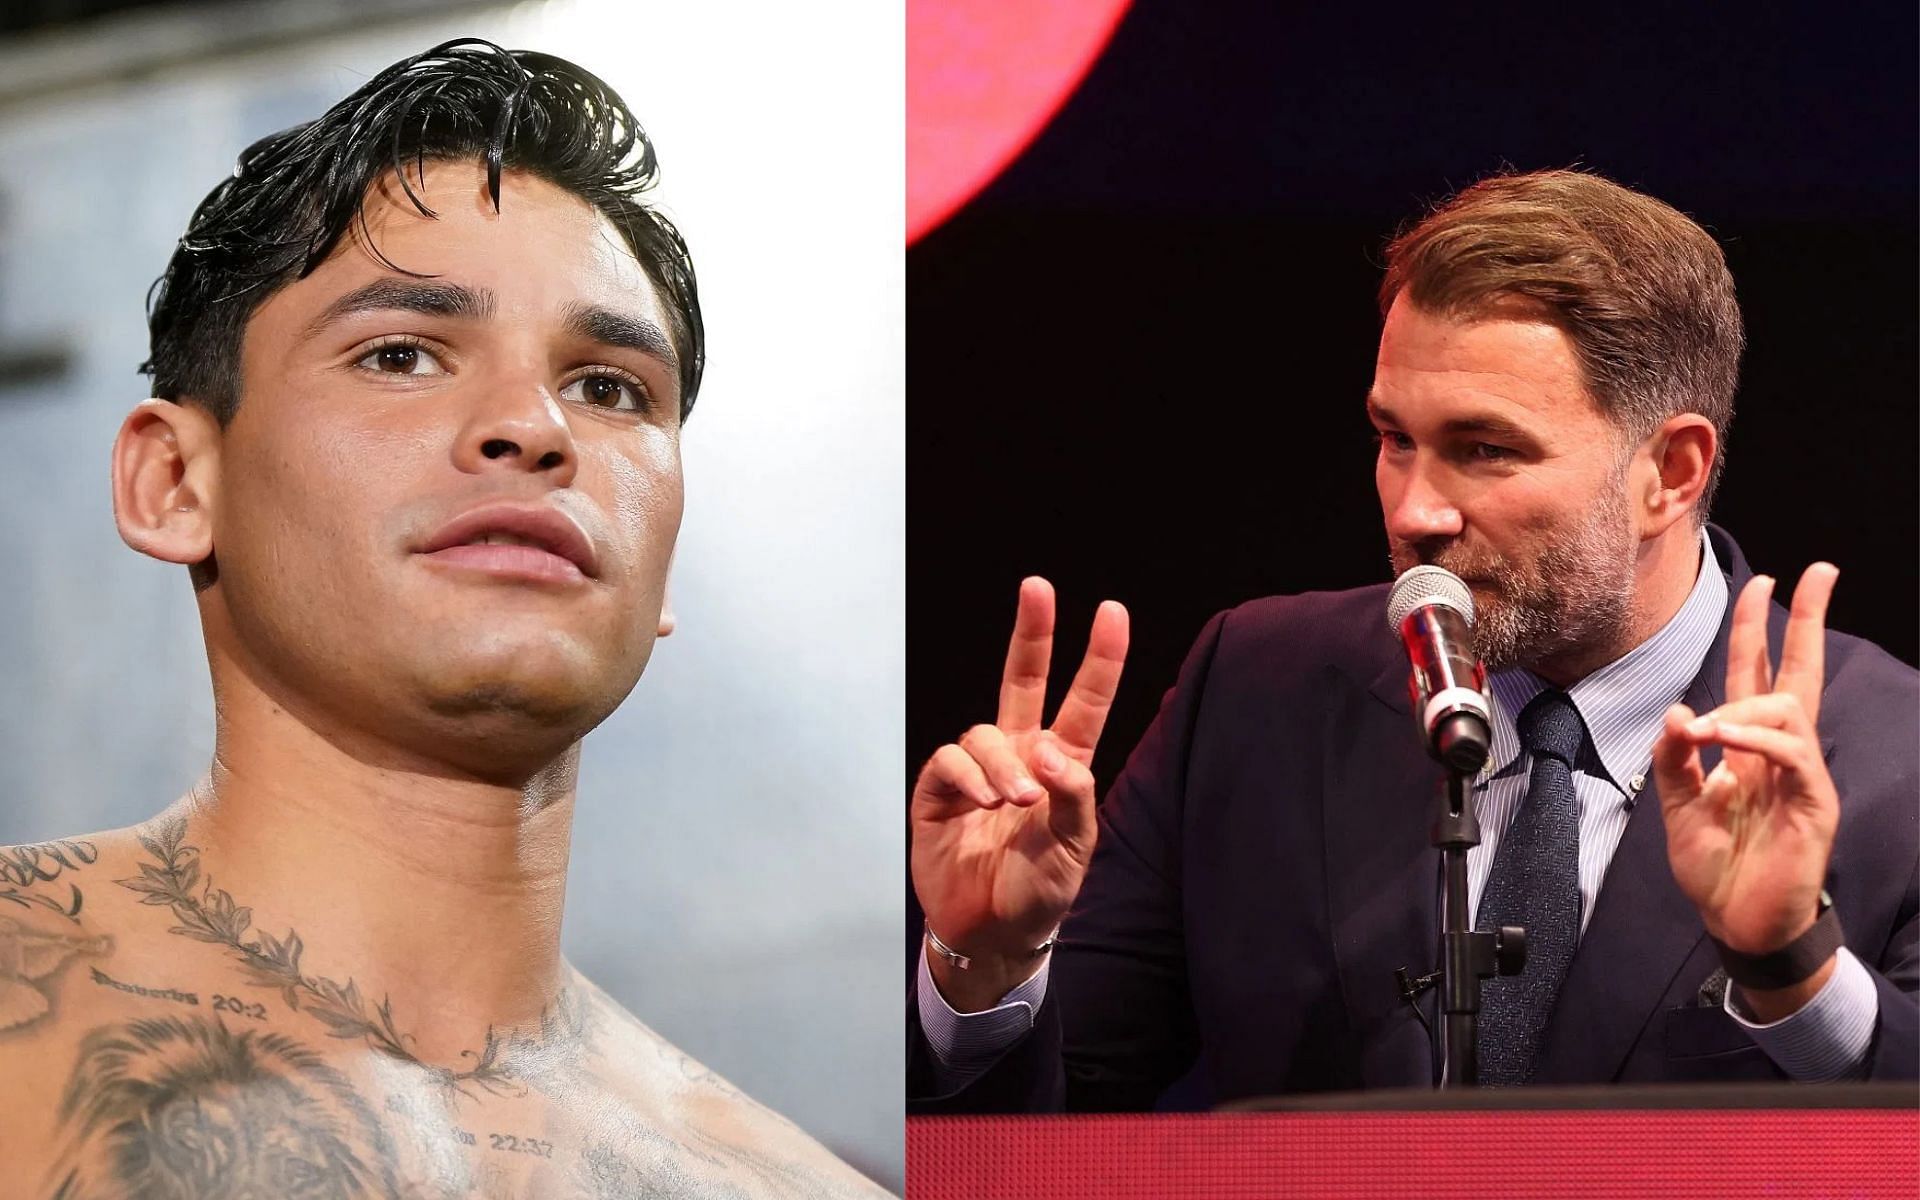 Eddie Hearn (right) shares warning with Ryan Garcia (left) after his PED accusations [Images Courtesy: @GettyImages]